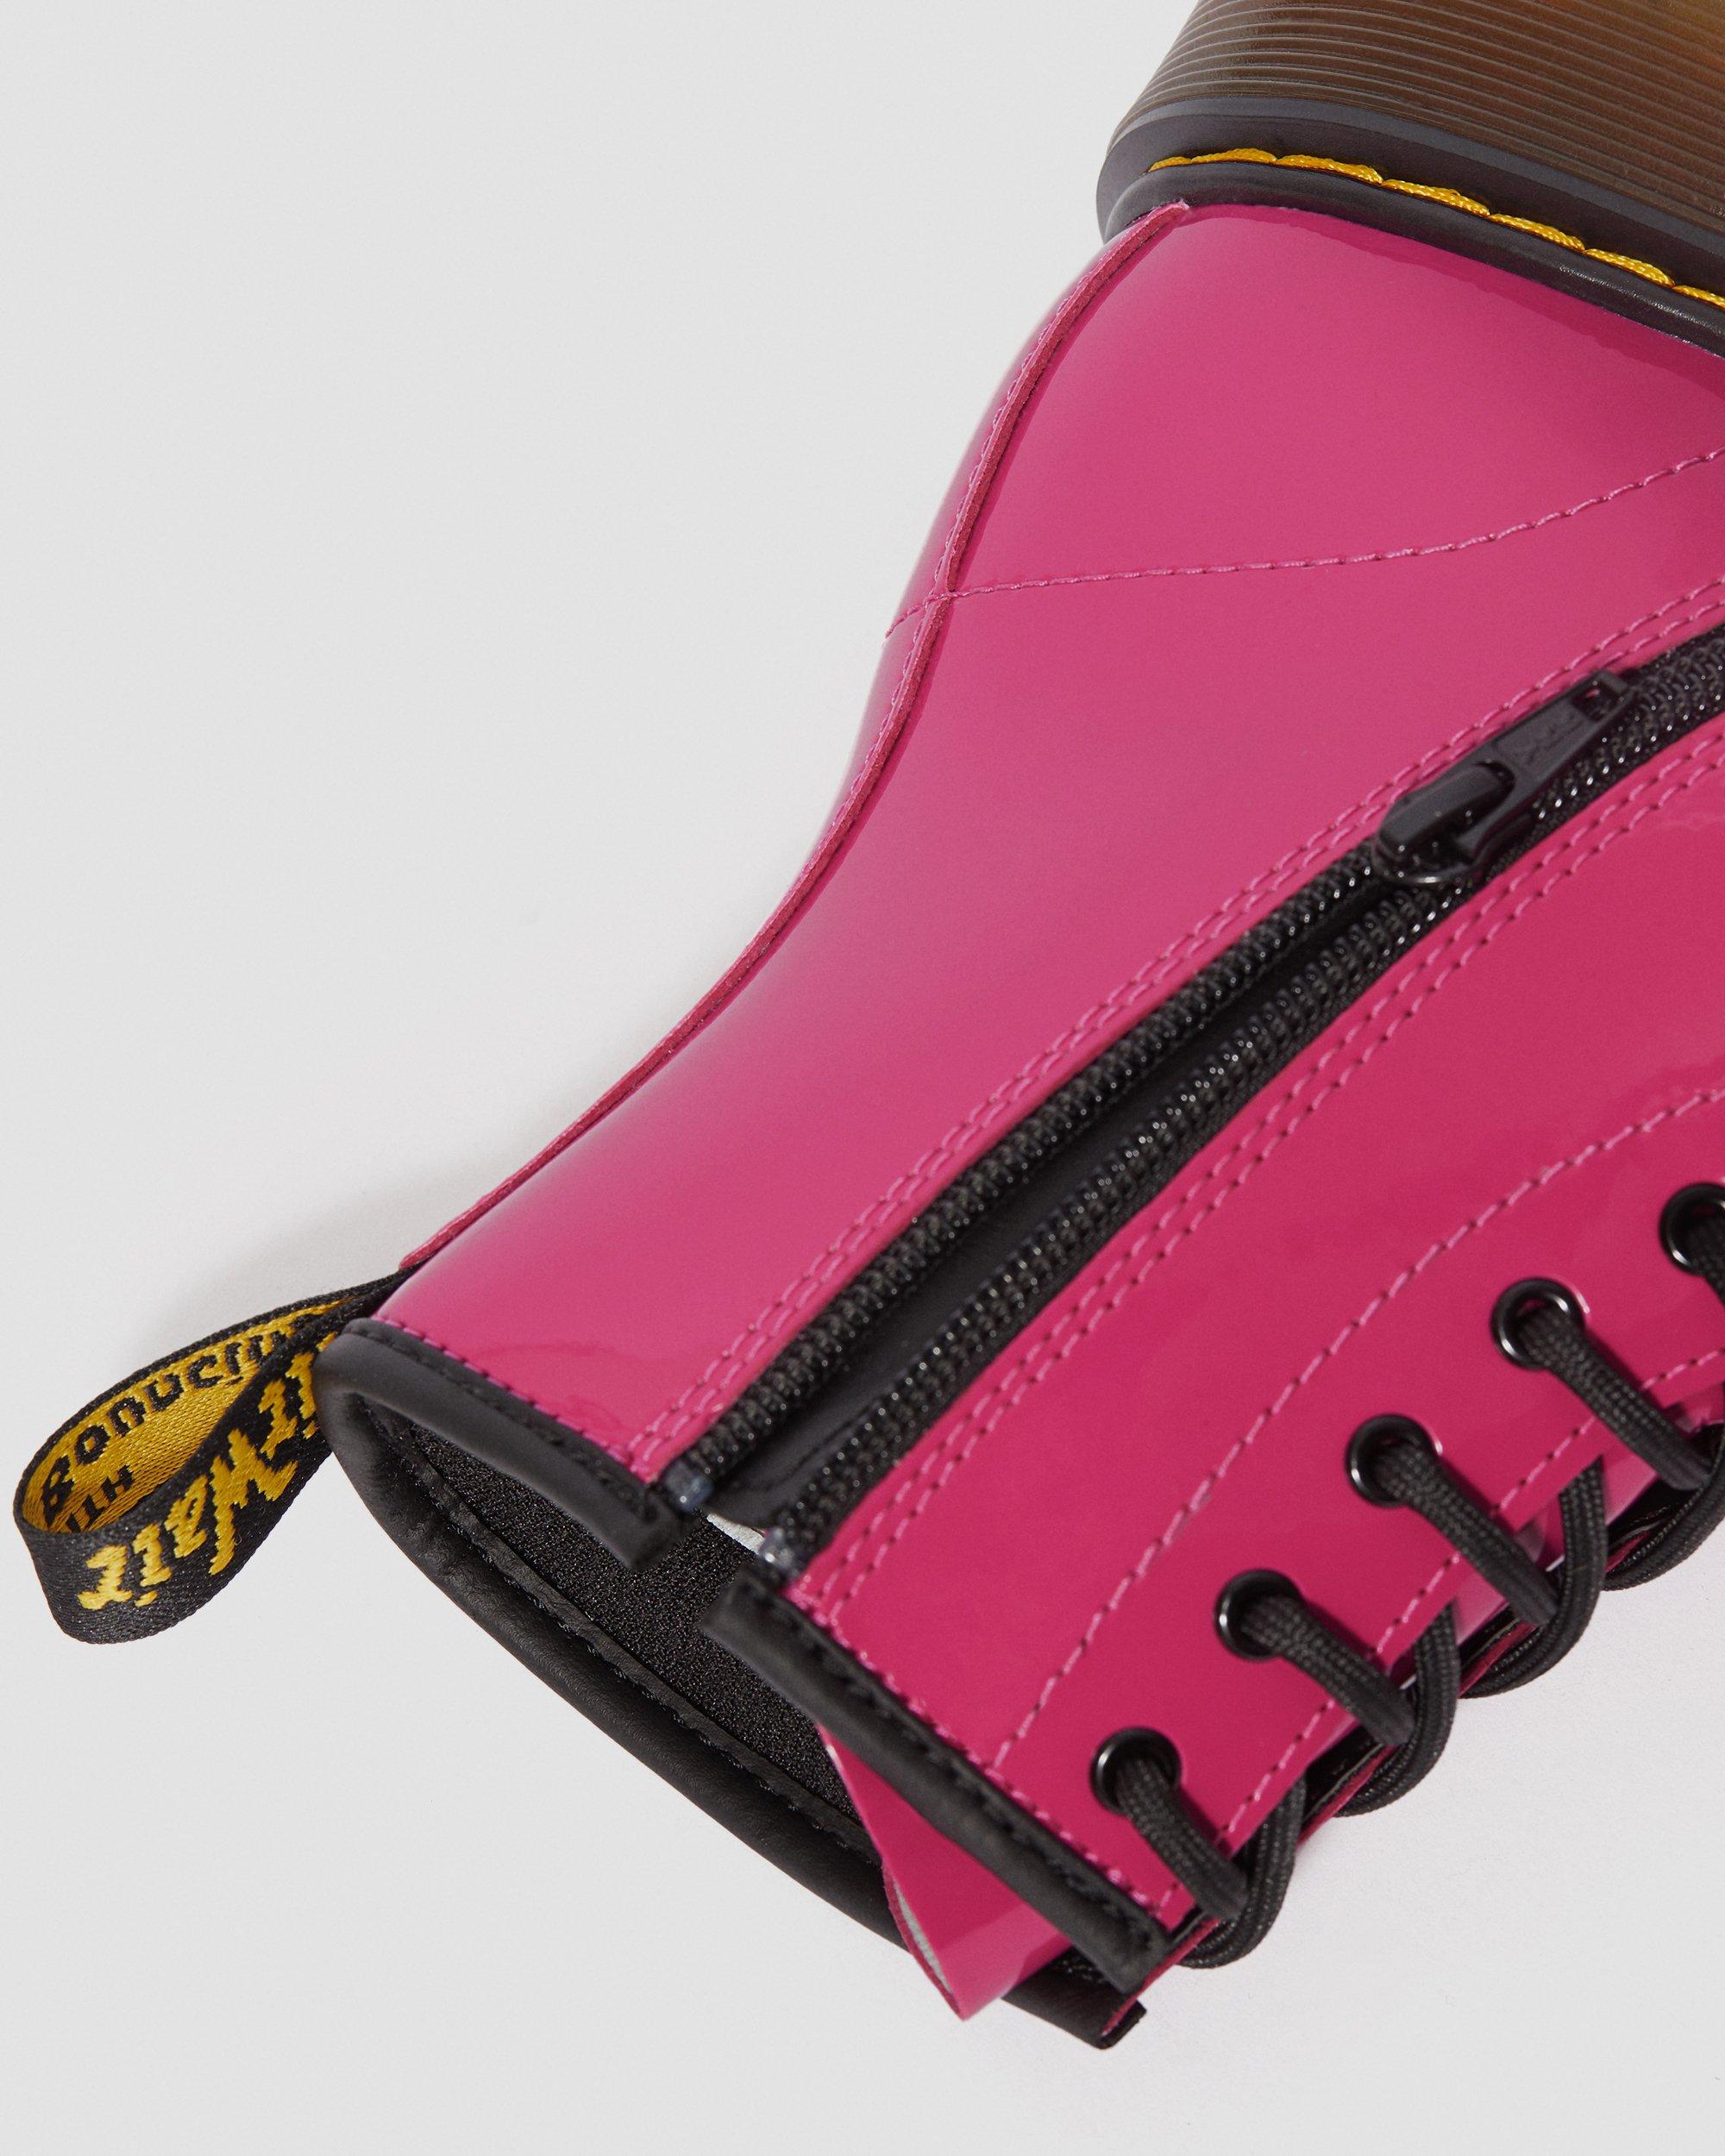 JUGEND 1460 PATENT in Hot Pink